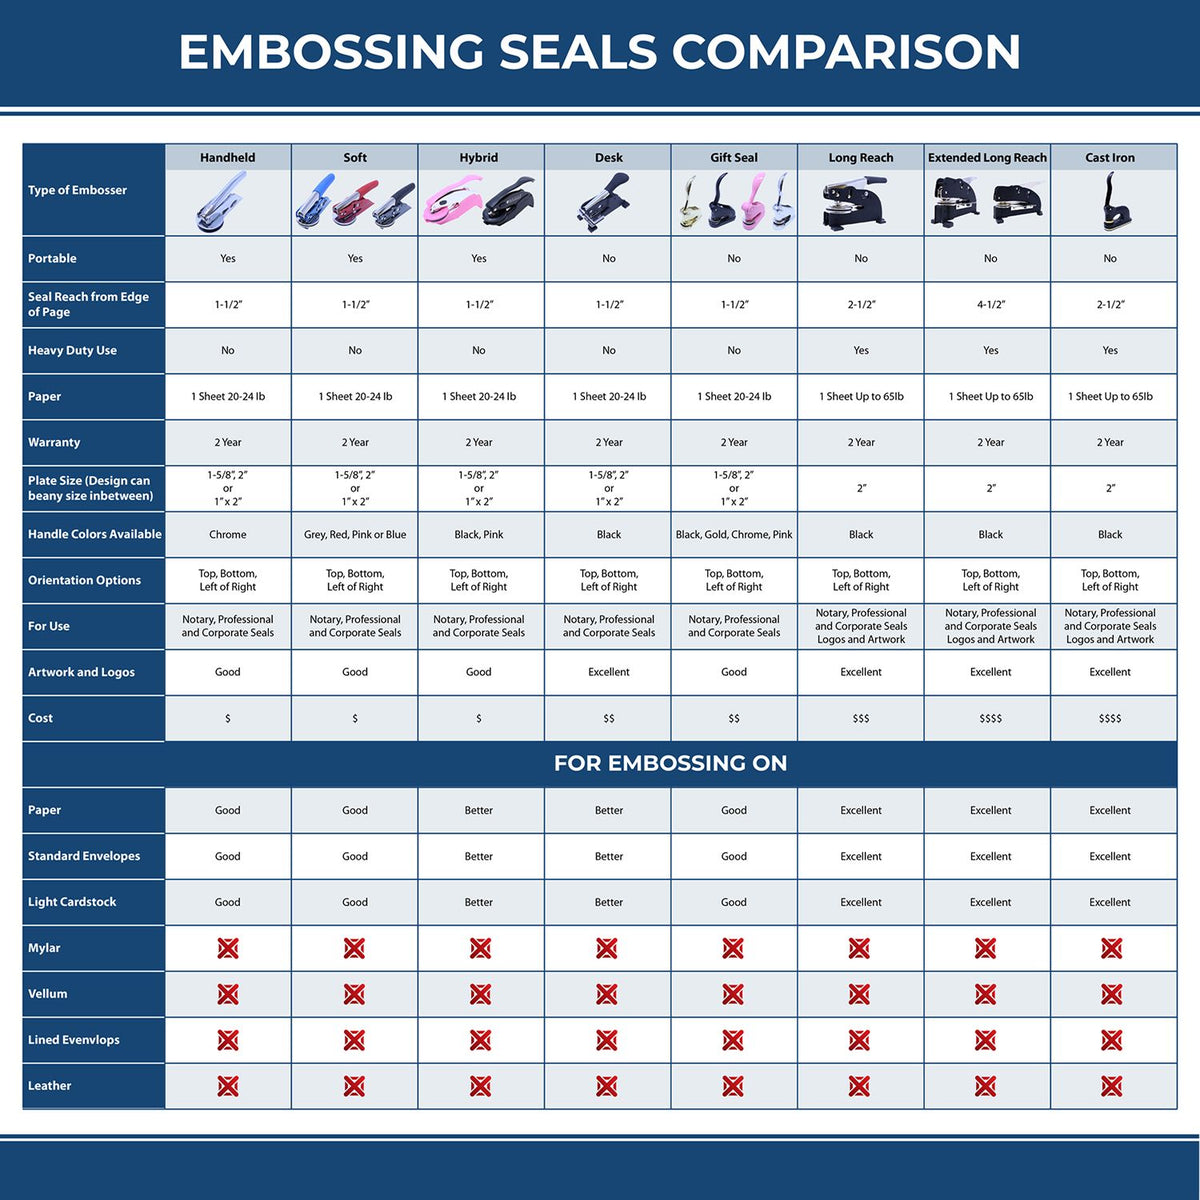 A comparison chart for the different types of mount models available for the State of West Virginia Extended Long Reach Geologist Seal